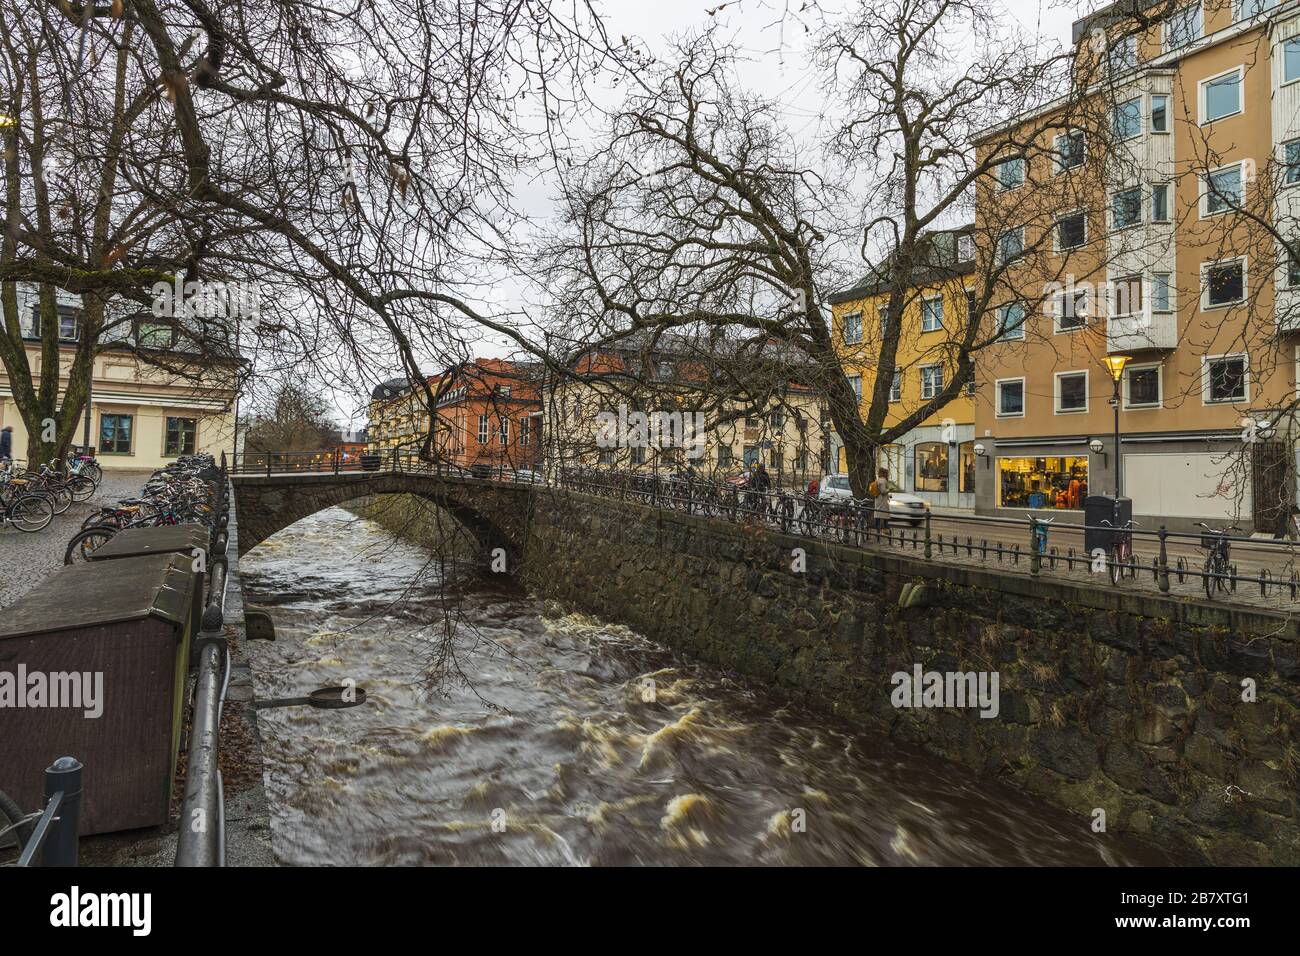 Gorgeous view on  street near river on background. Gorgeous sky with thunderclouds on a winter day.  Tourism, travel concept. Europe, Sweden, Uppsala. Stock Photo